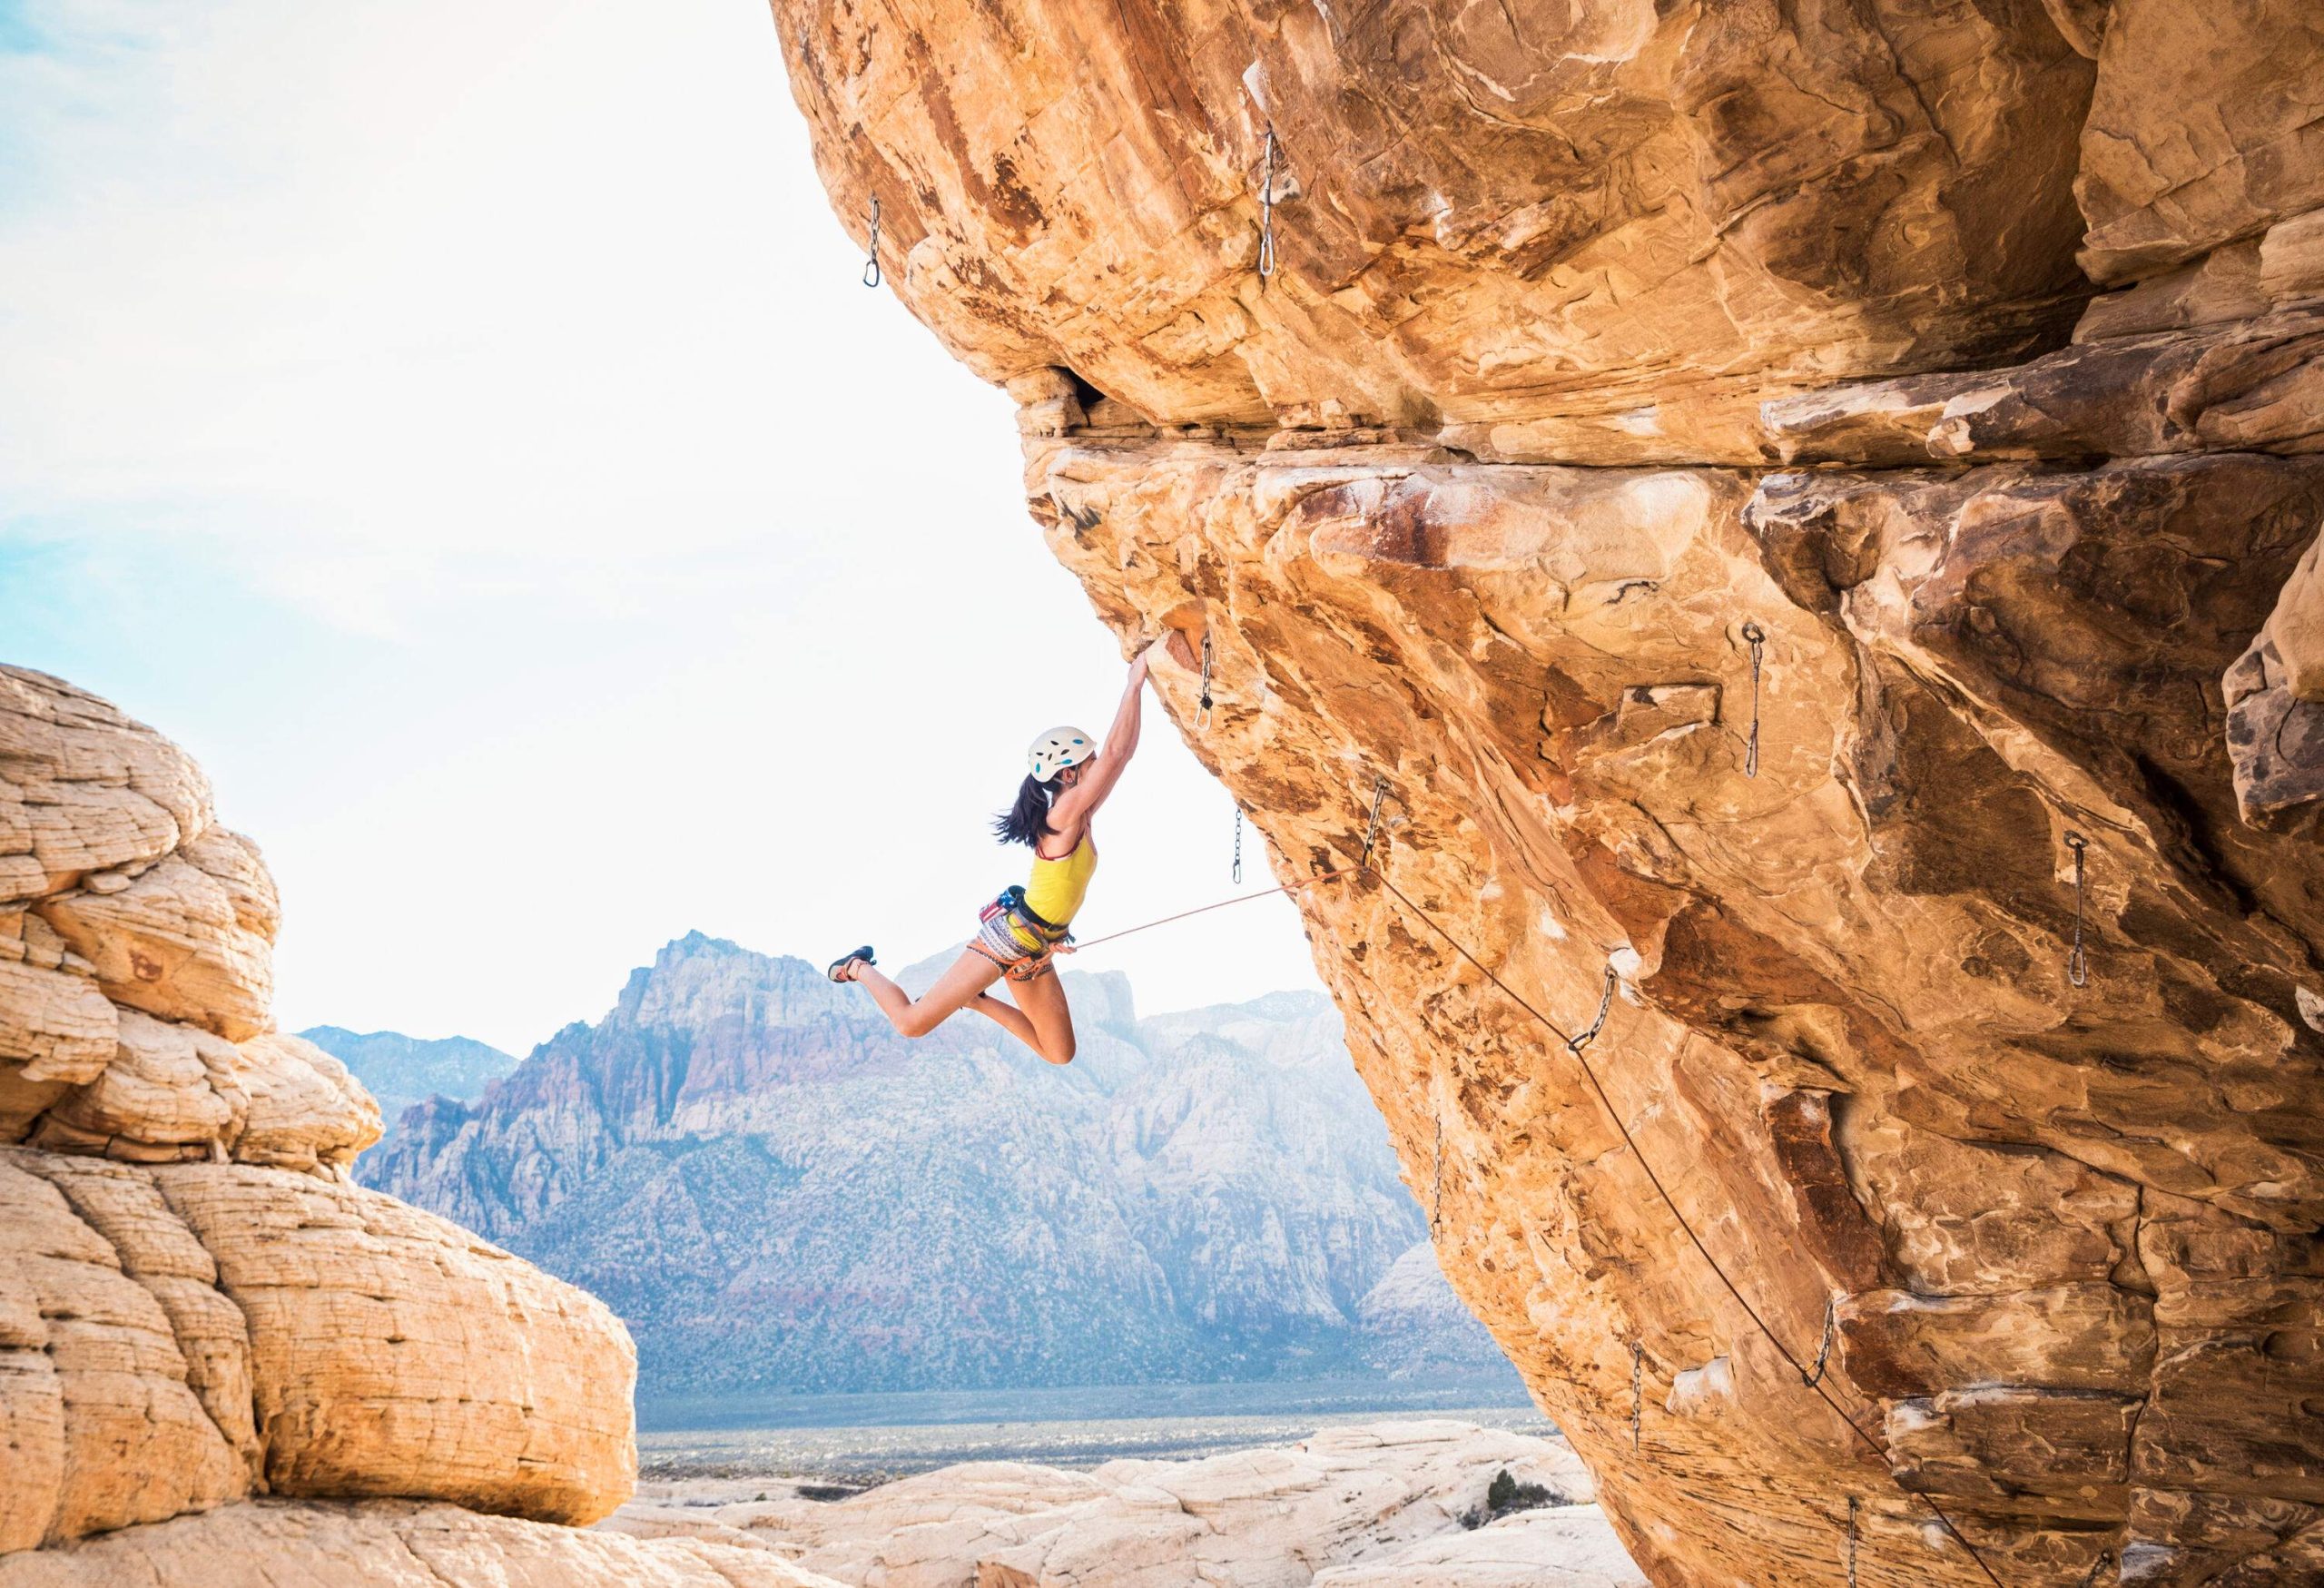 A woman fearlessly embraces the challenge of rock climbing as she ascends a towering cliff.